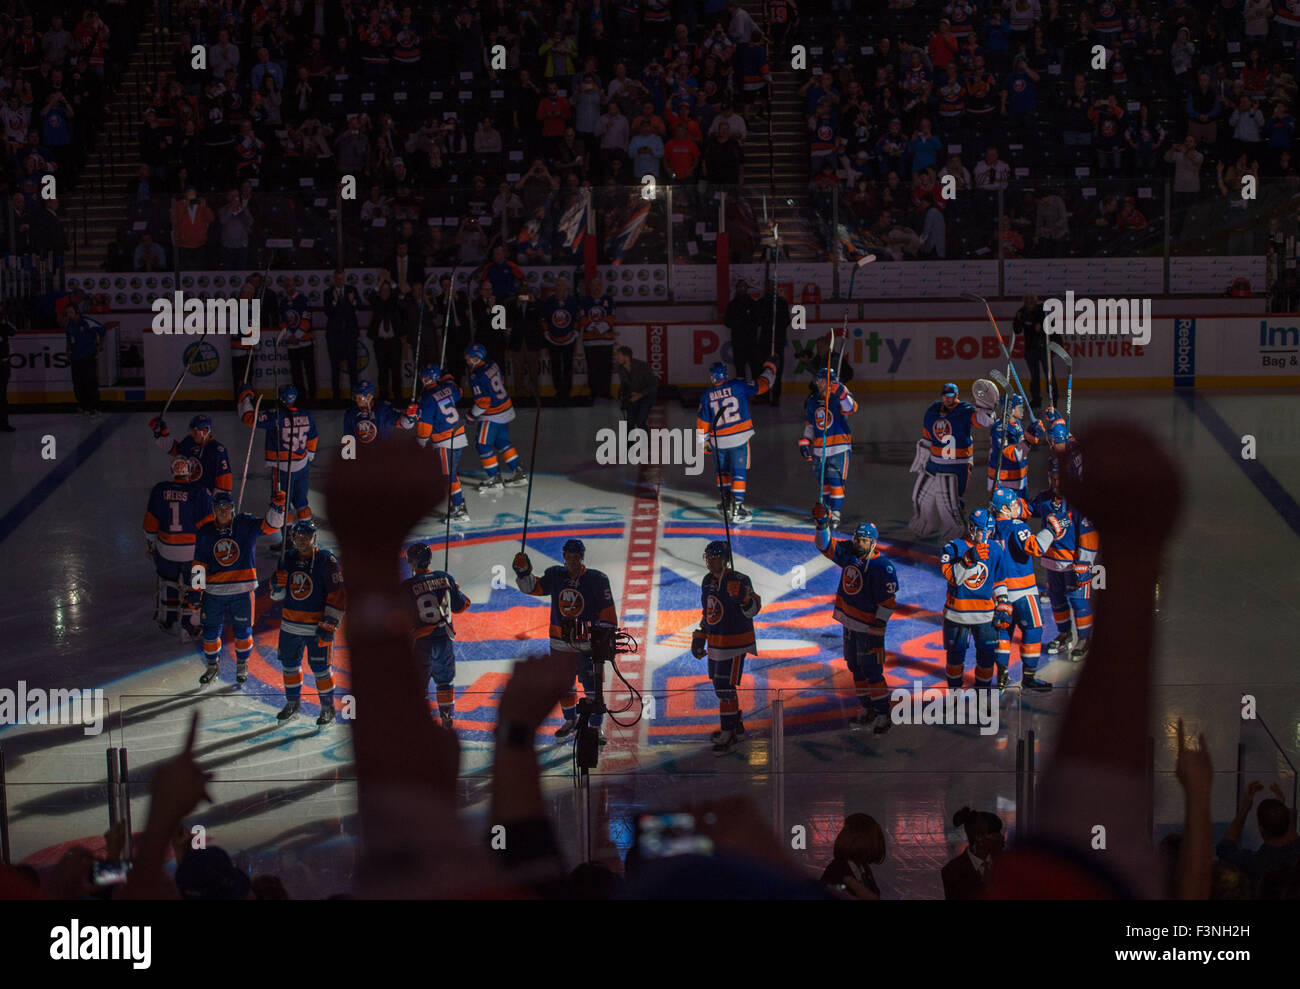 New York, NY, USA. 9th Oct, 2015. New York Islanders take the ice for the inaugural regular season NHL hockey game at Barclays Center in New York, Friday, Oct. 9, 2015. © Bryan Smith/ZUMA Wire/Alamy Live News Stock Photo